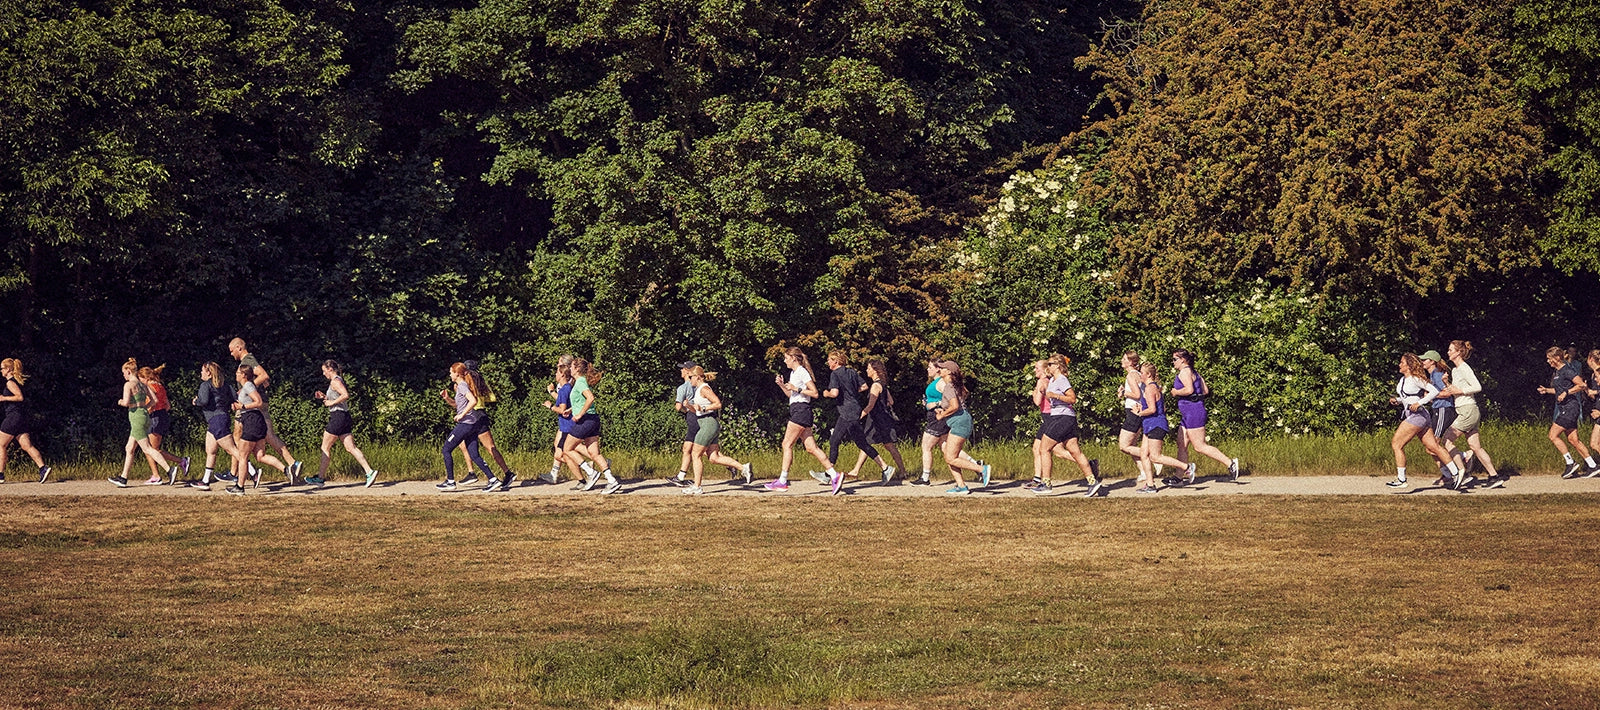 Rookie Runners of Copenhagen - Des Initiatives Remarquables